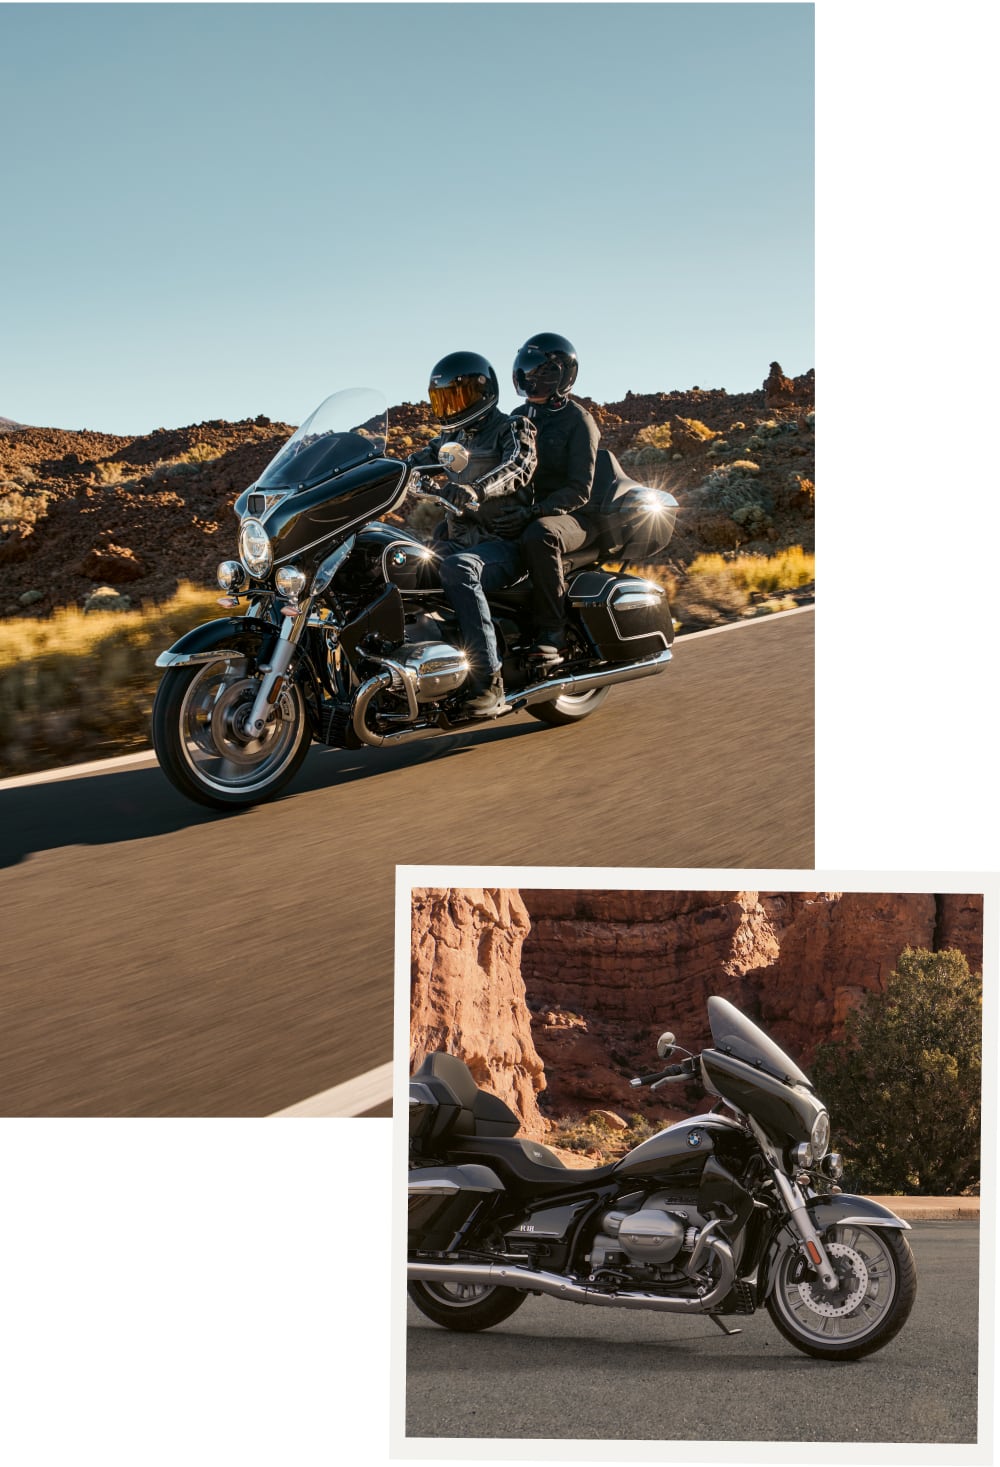 A collage of two bikers riding on motorcycle outside and image of 